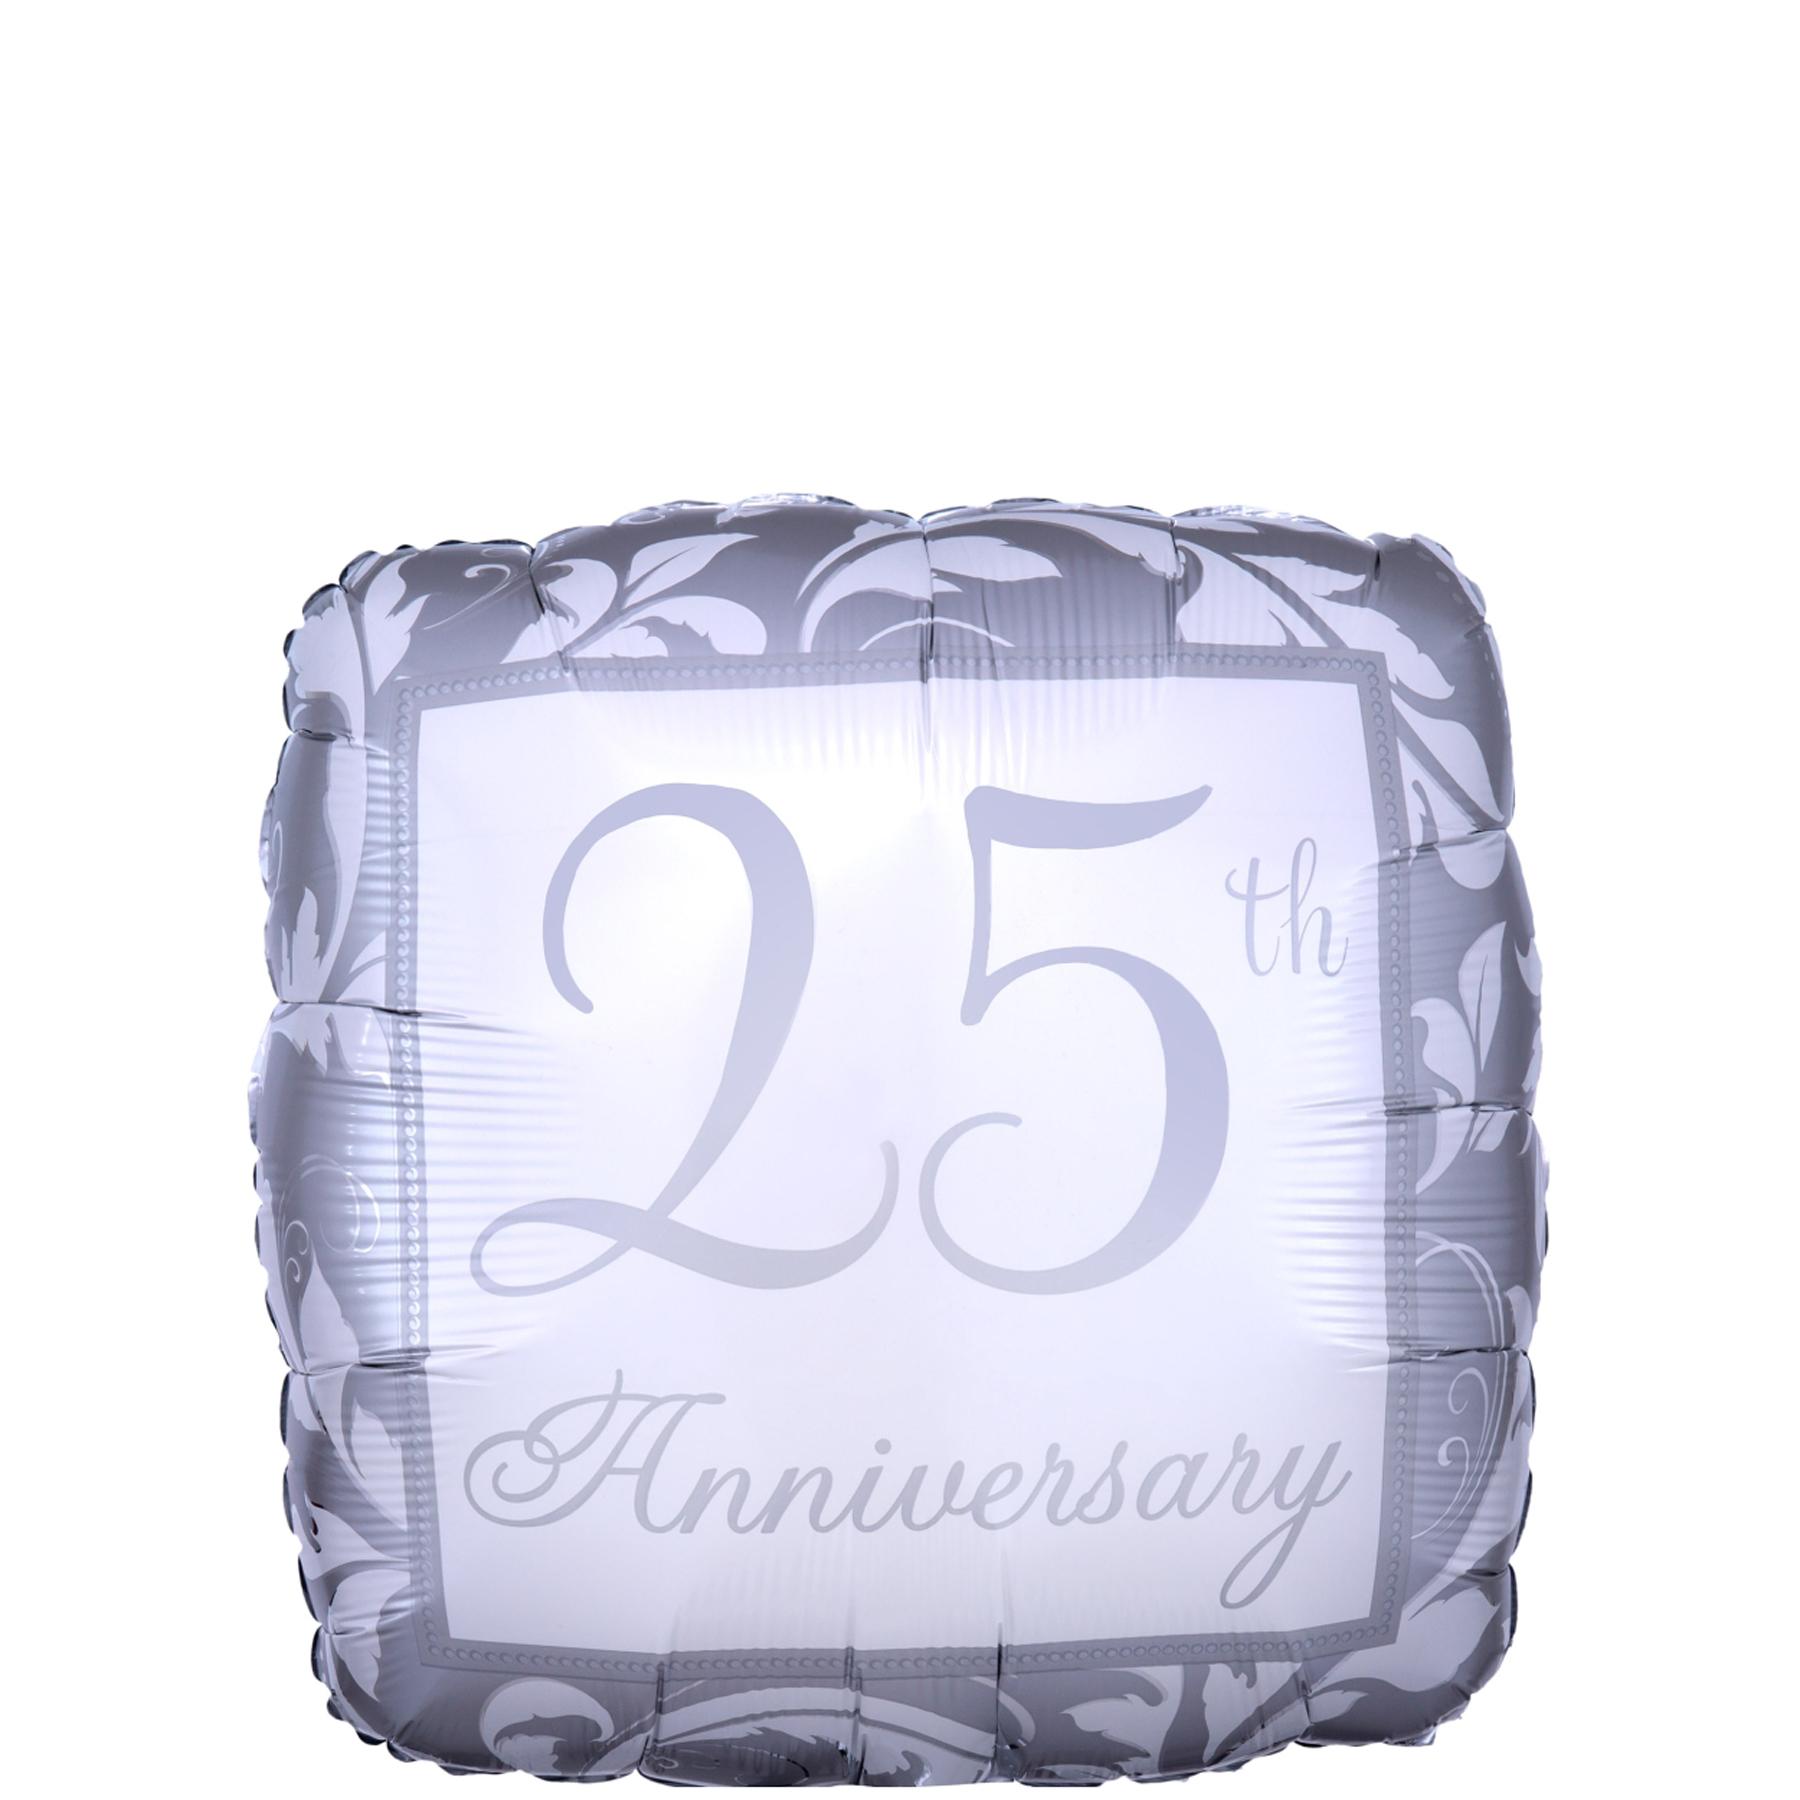 25th Anniversary Silver Elegant Square Balloon 45cm Balloons & Streamers - Party Centre